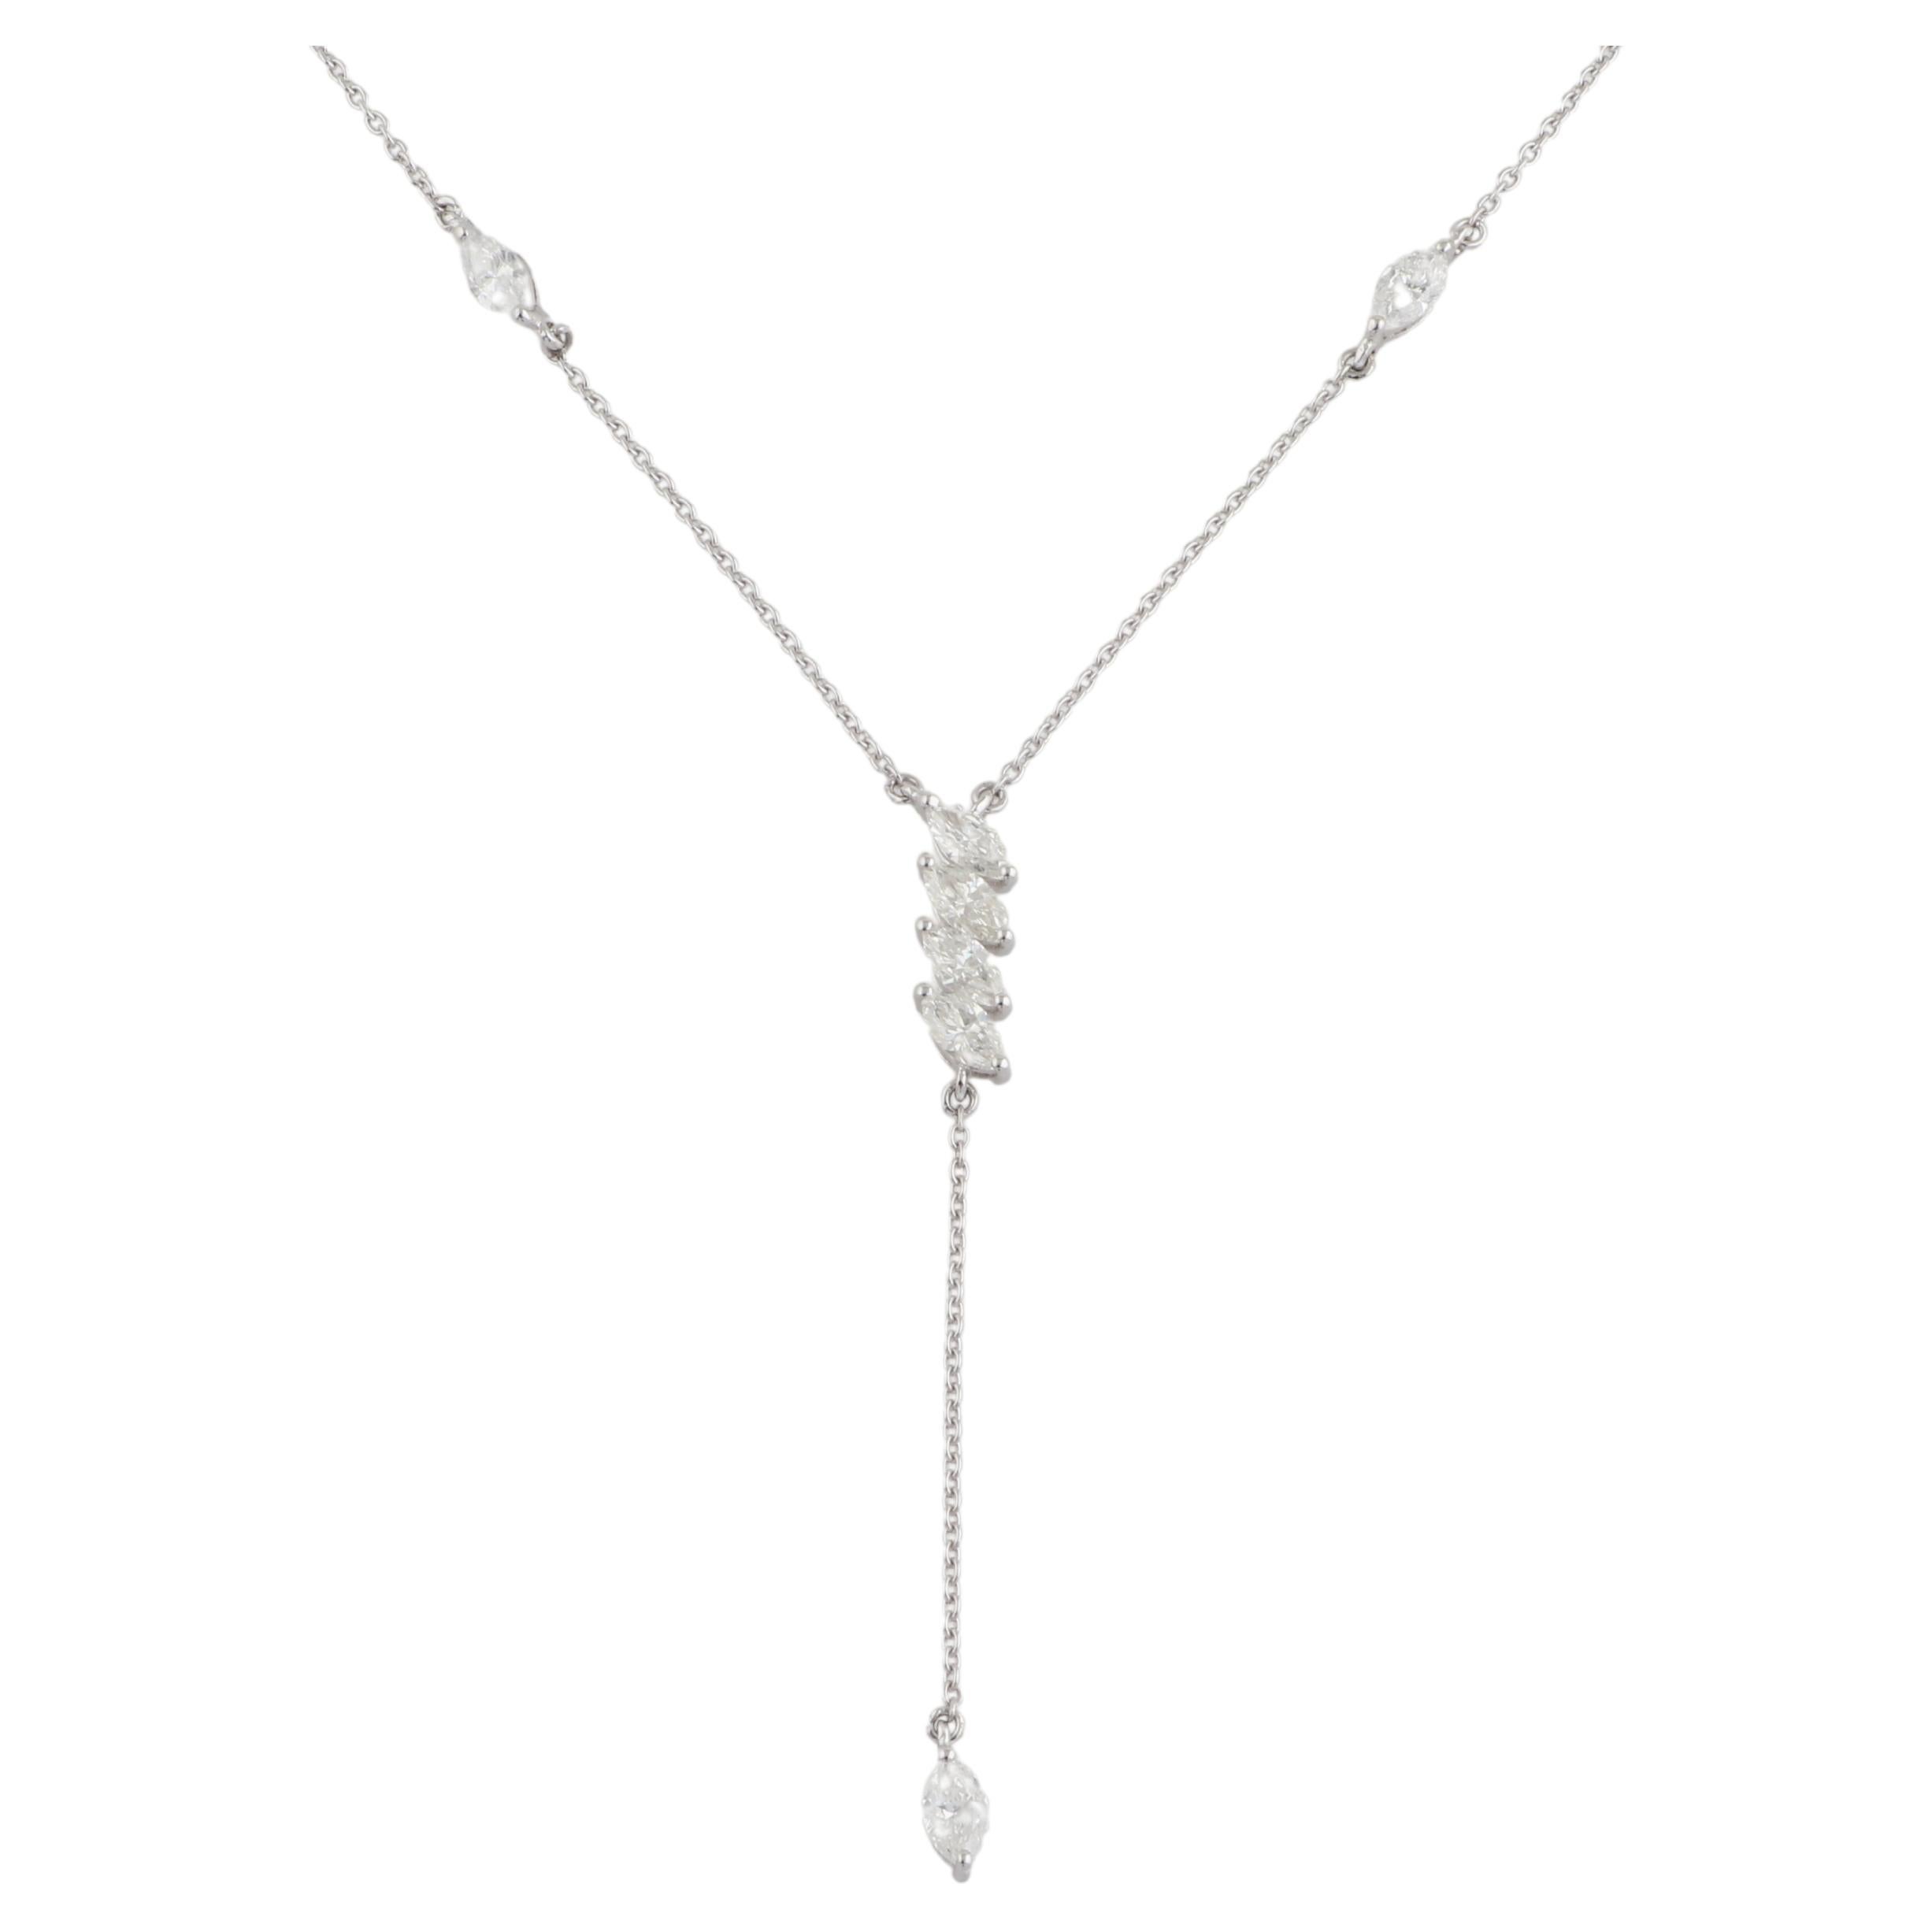 This Marquise Diamond Lariat Necklace is a versatile piece that can be worn for various occasions, adding a touch of glamour and sophistication to any ensemble. Whether dressed up for a formal event or paired with a casual outfit, this necklace is